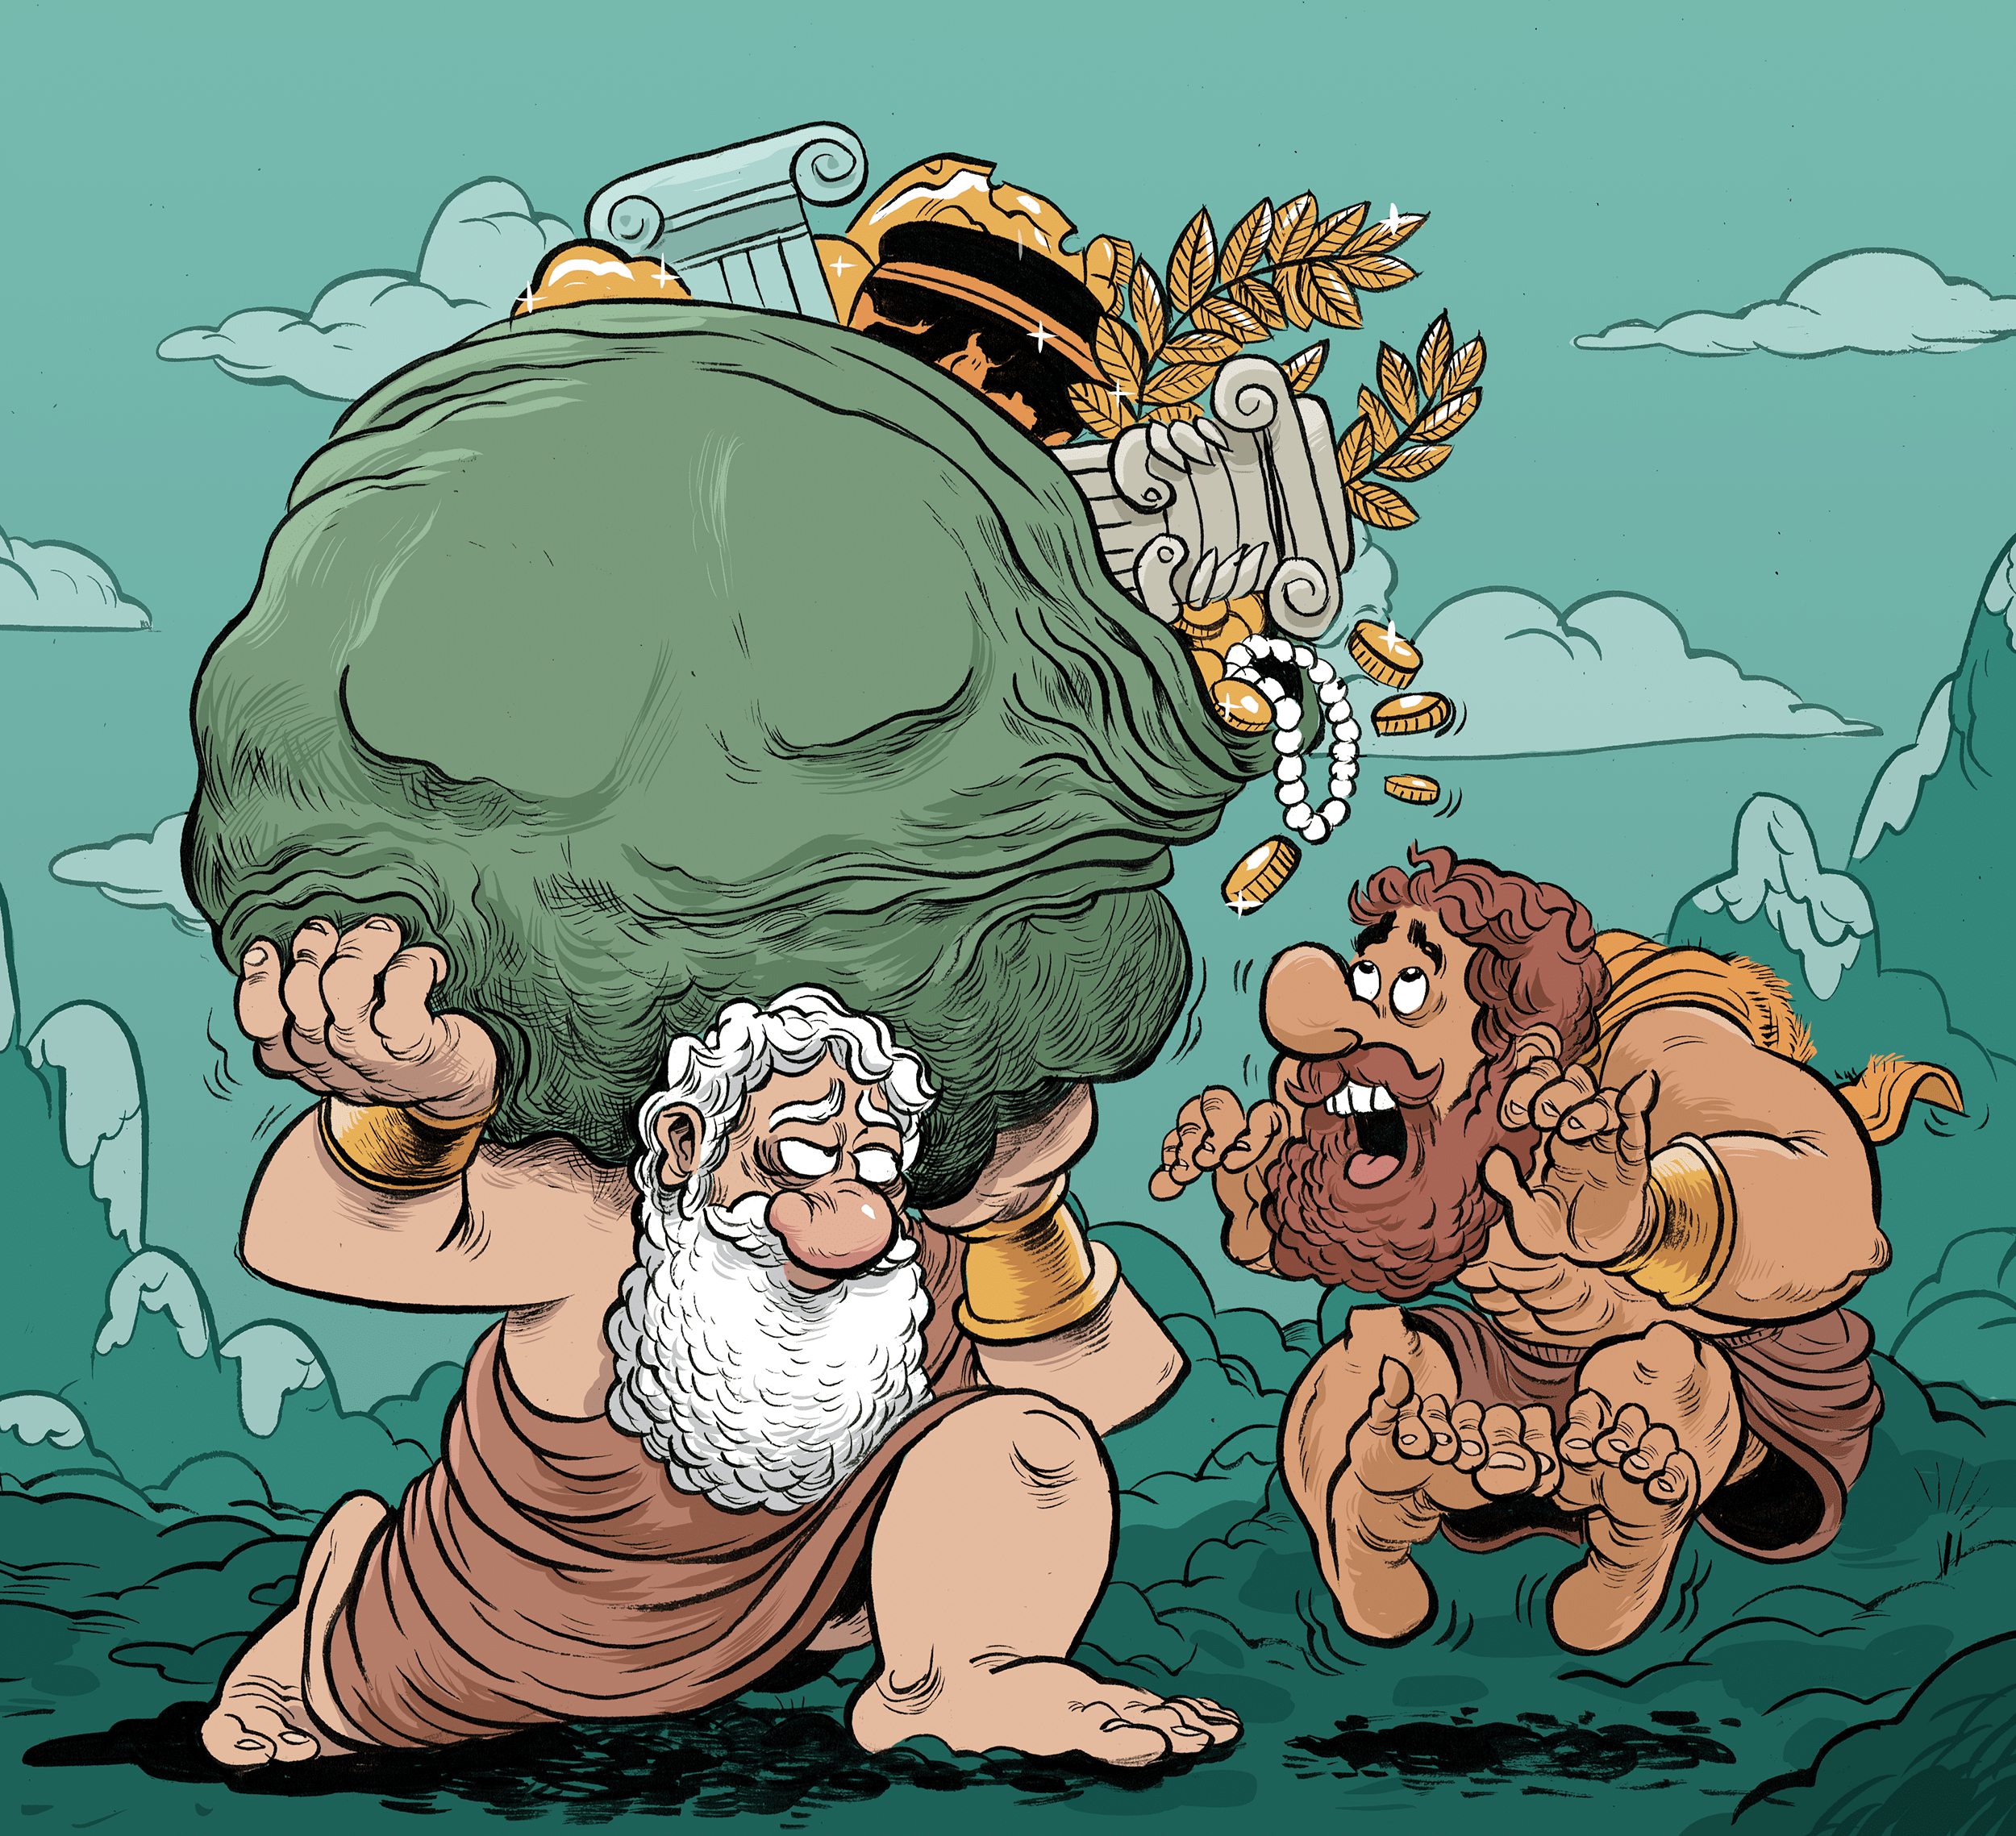 Greek Mythology analogy, Atlas carrying a sack of wealth, and hercules is distraught looking at it, thinking of all the possible tax he might have to pay if he inherits it.